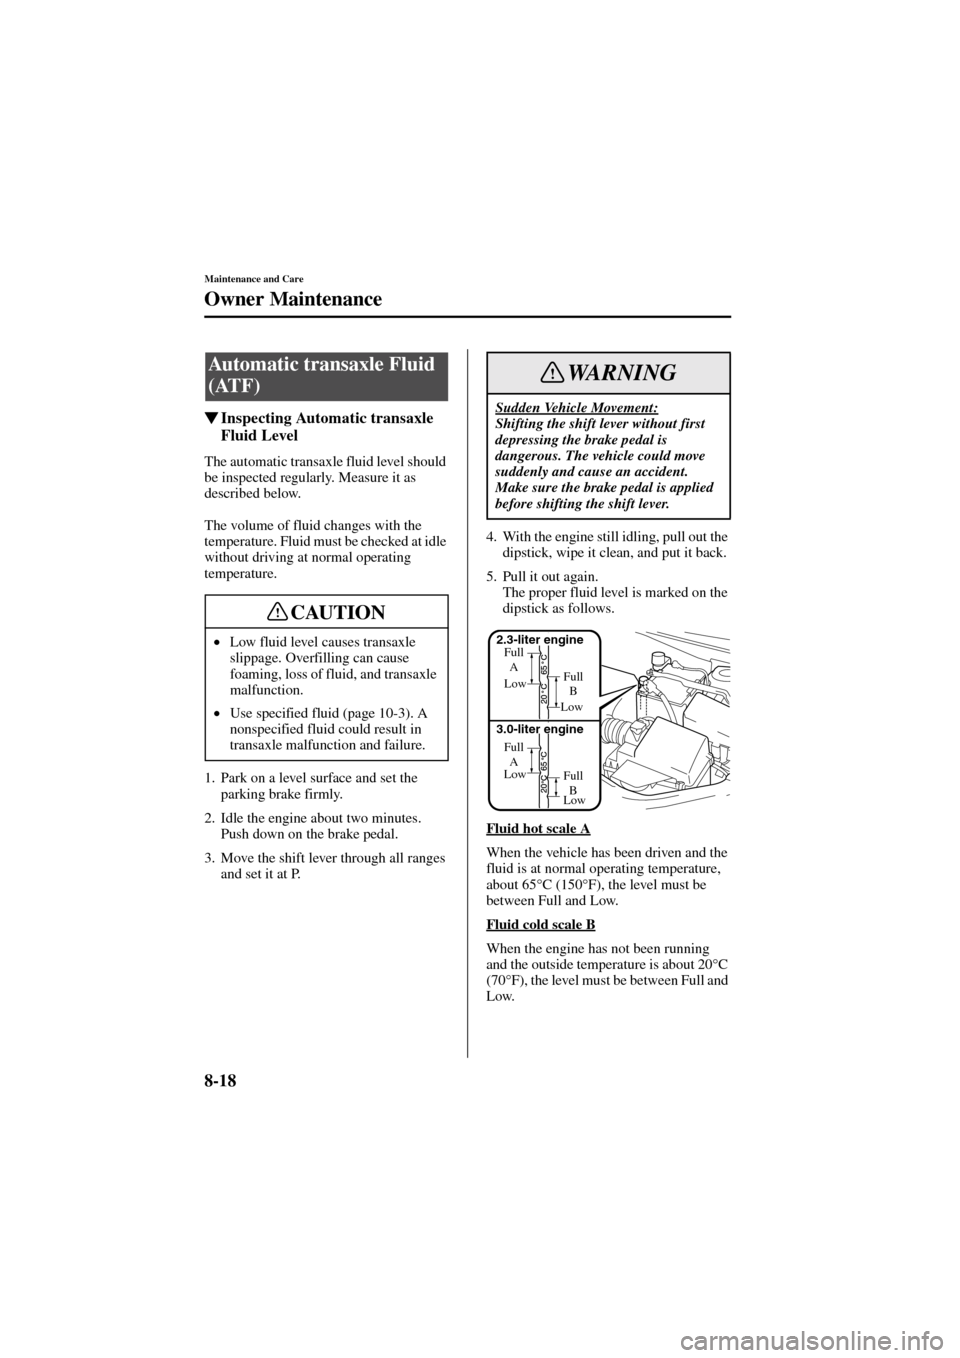 MAZDA MODEL 6 2004   (in English) User Guide 8-18
Maintenance and Care
Owner Maintenance
Form No. 8R29-EA-02I
Inspecting Automatic transaxle 
Fluid Level
The automatic transaxle fluid level should 
be inspected regularly. Measure it as 
describ